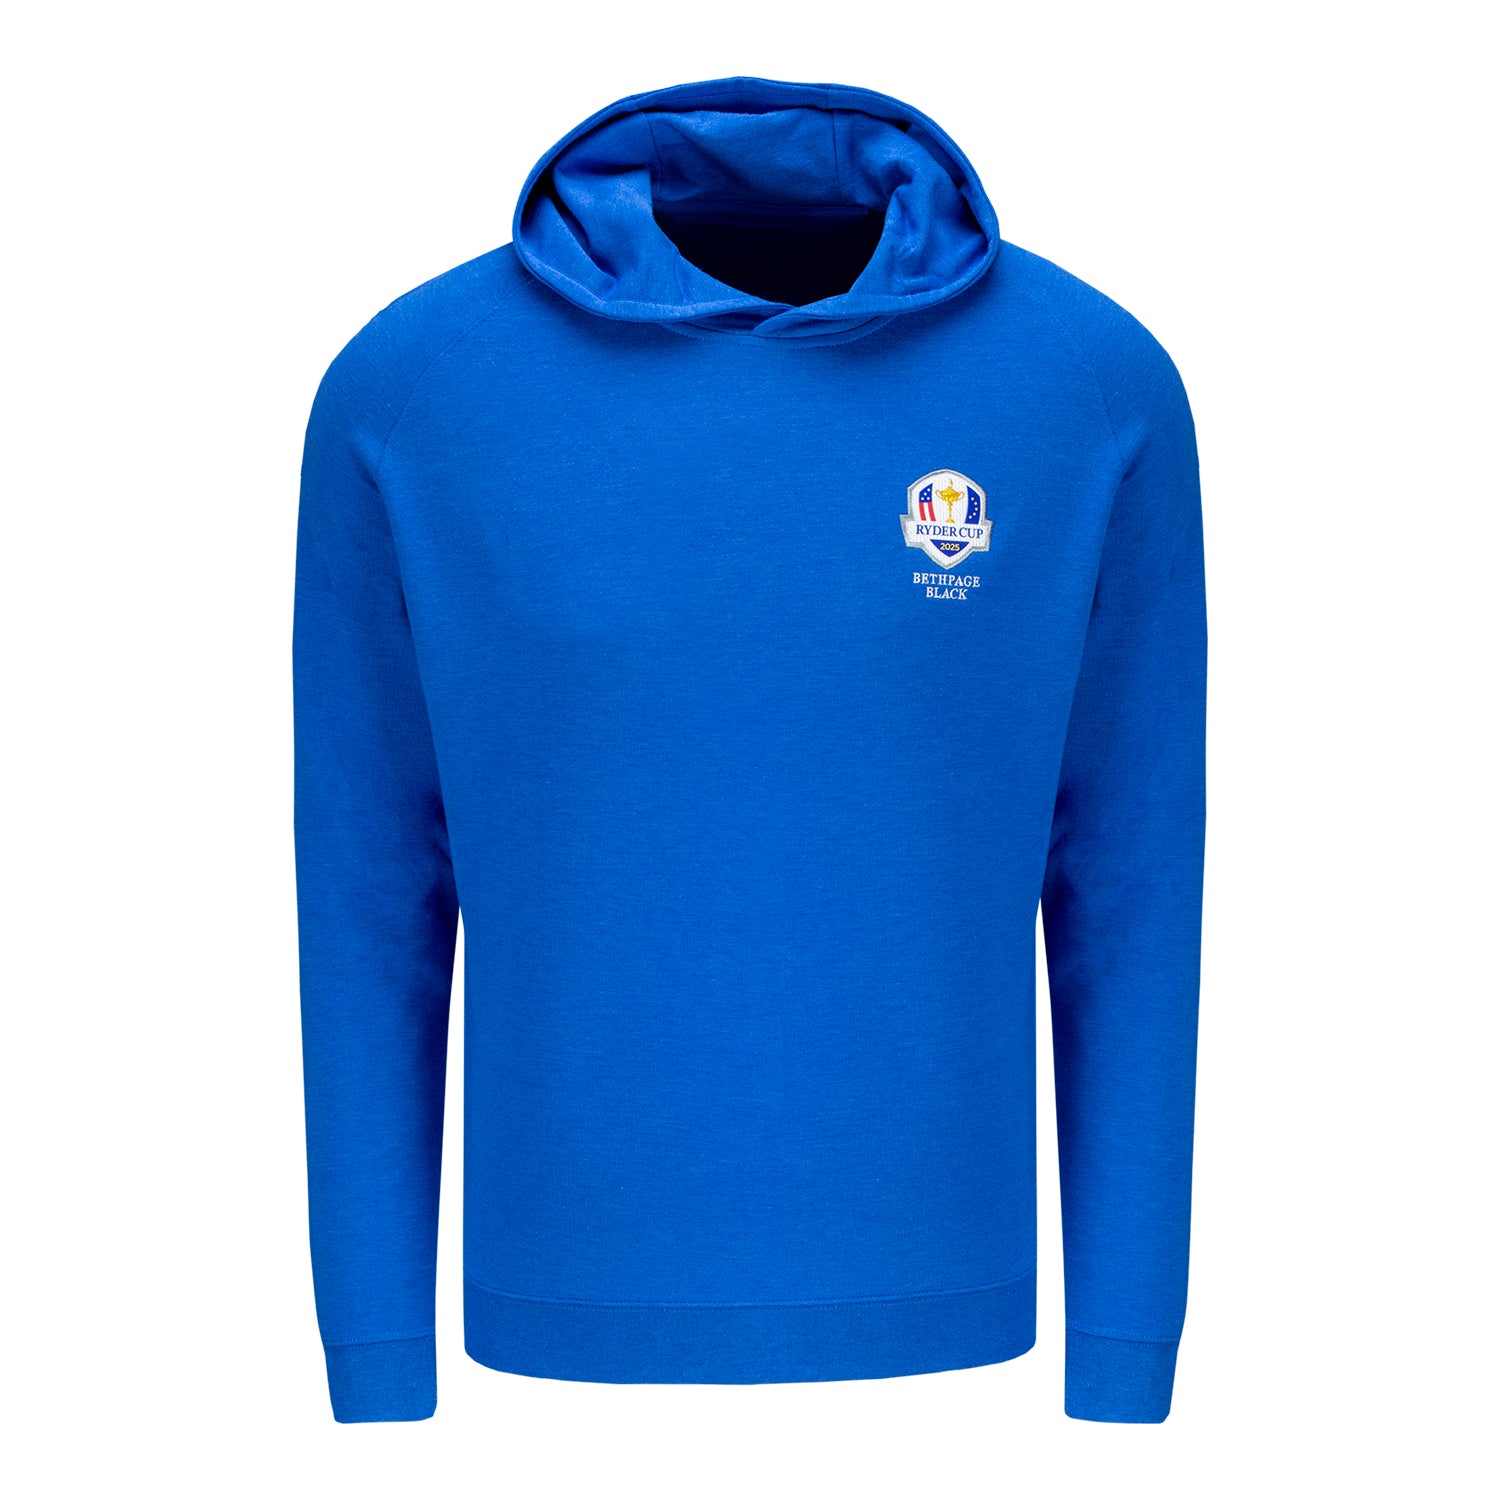 Holderness & Bourne 2025 Ryder Cup Lawson Performance Pullover - Front View